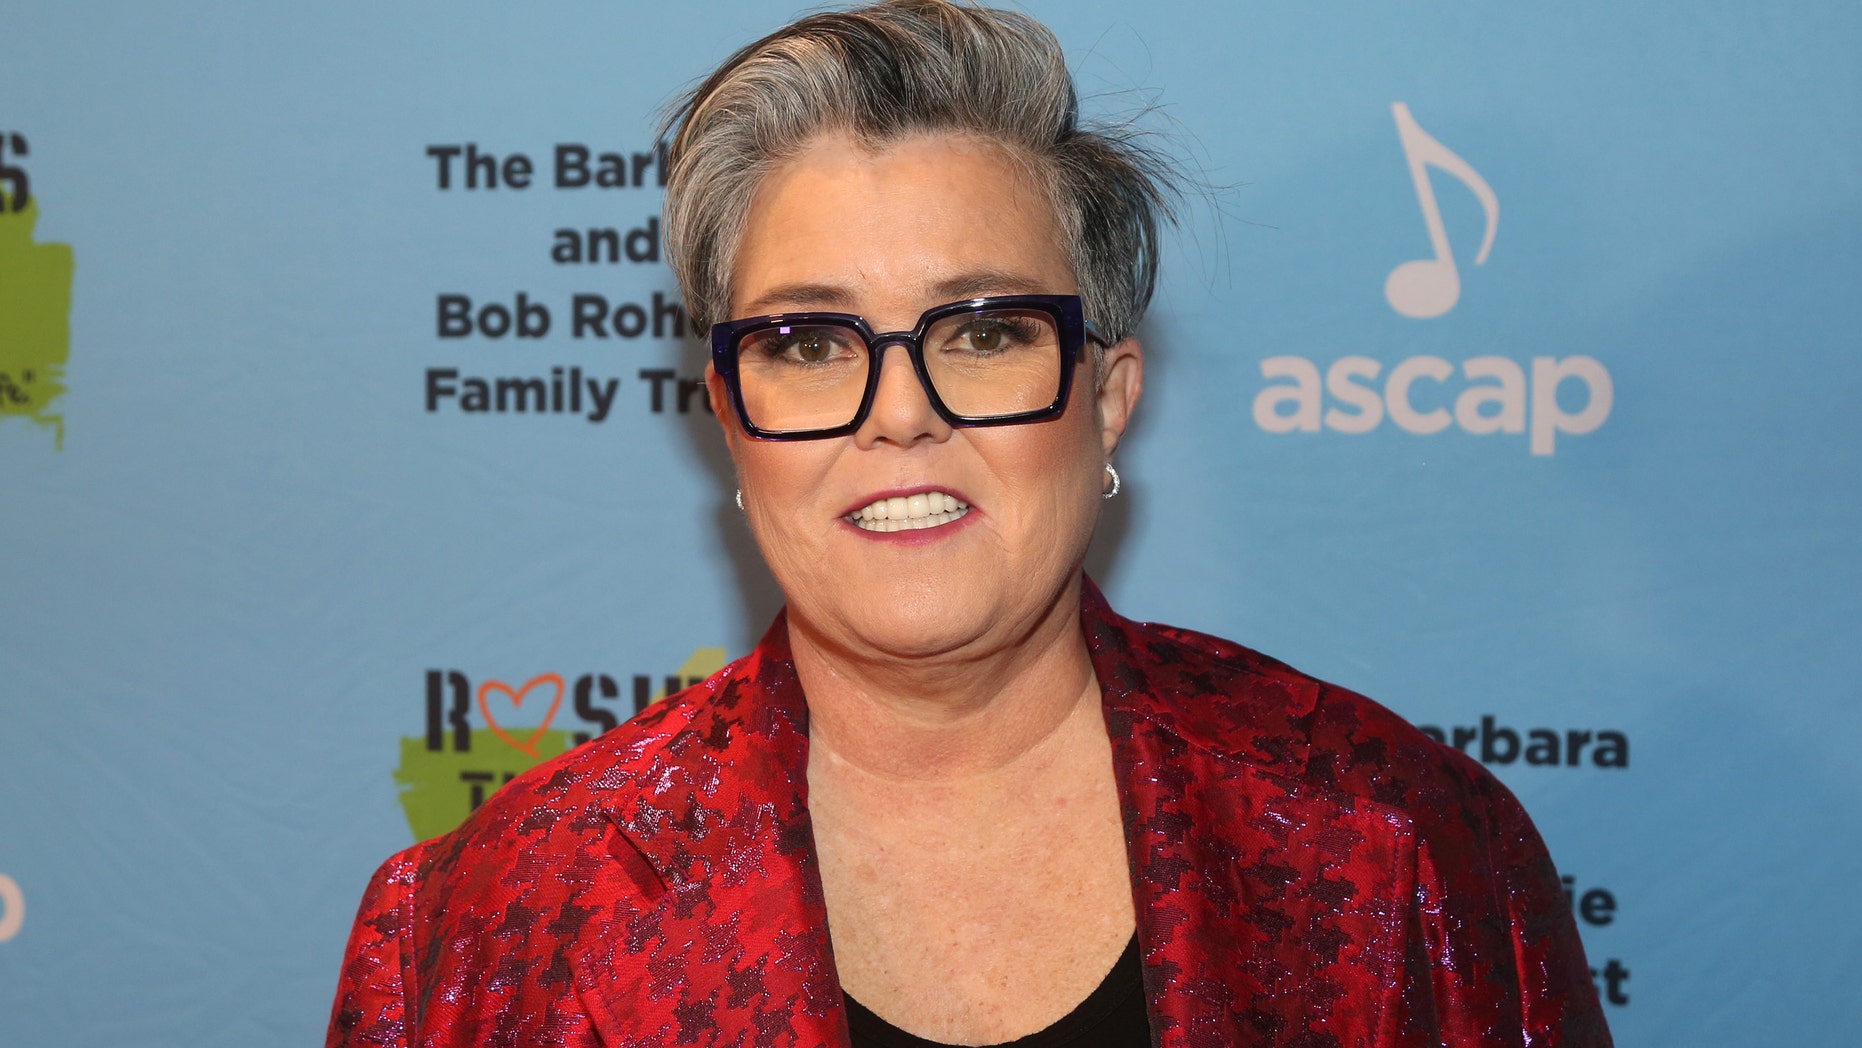 ad9c3d5a-Rosie-ODonnell.jpg